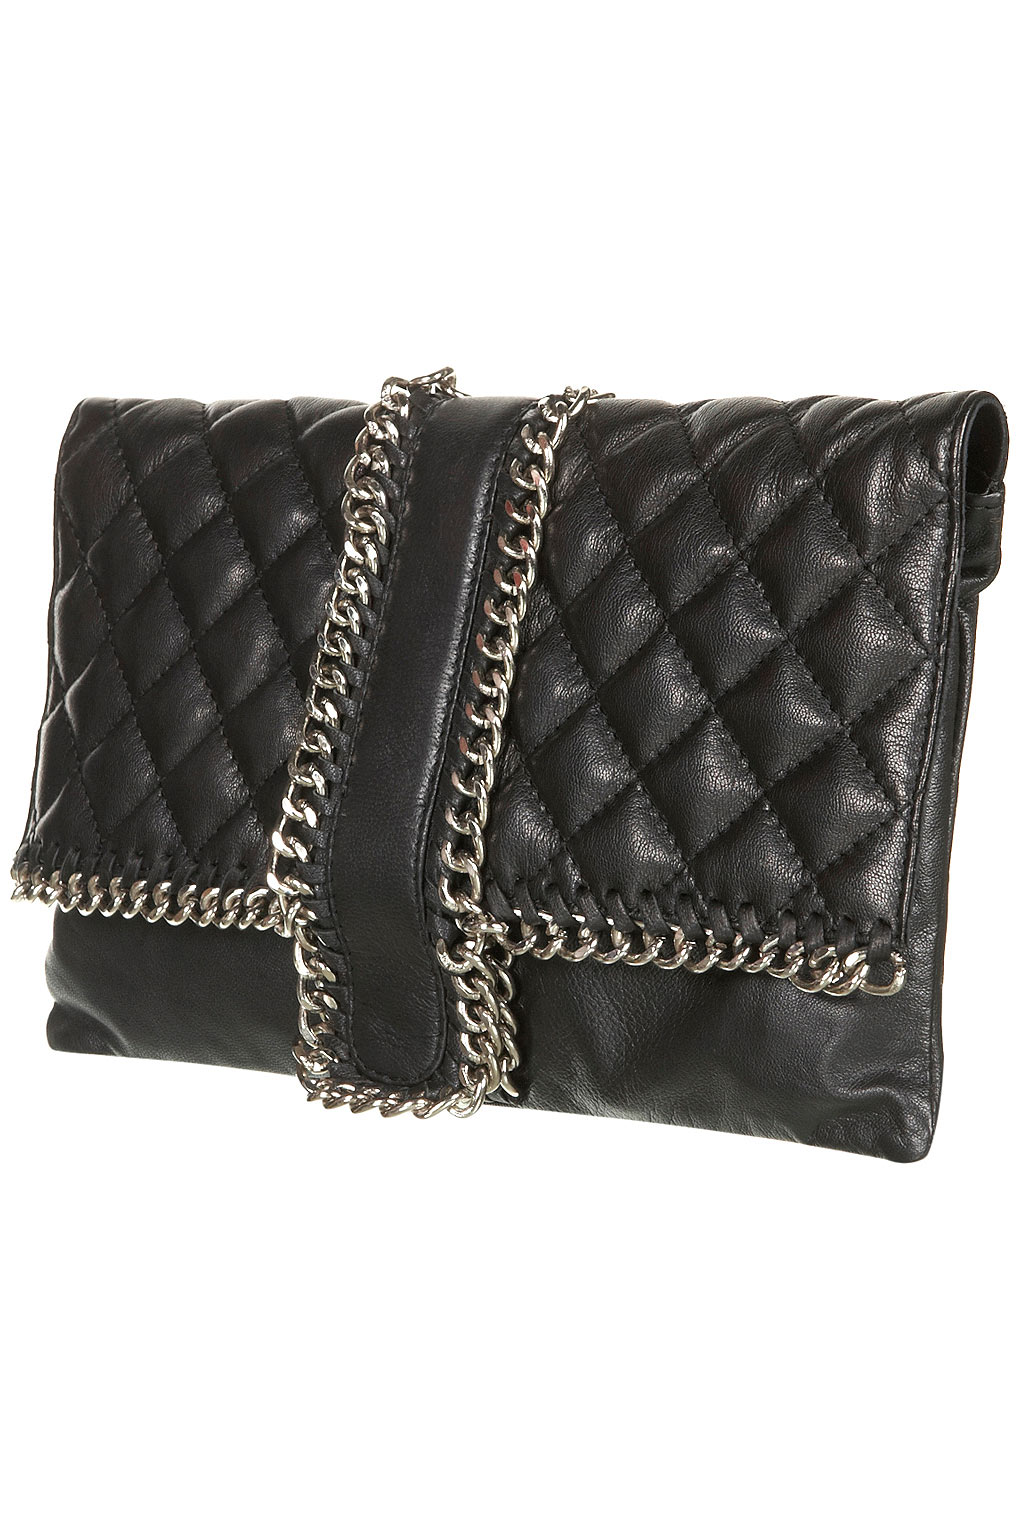 TOPSHOP Leather Quilted Chain Clutch Bag in Black - Lyst